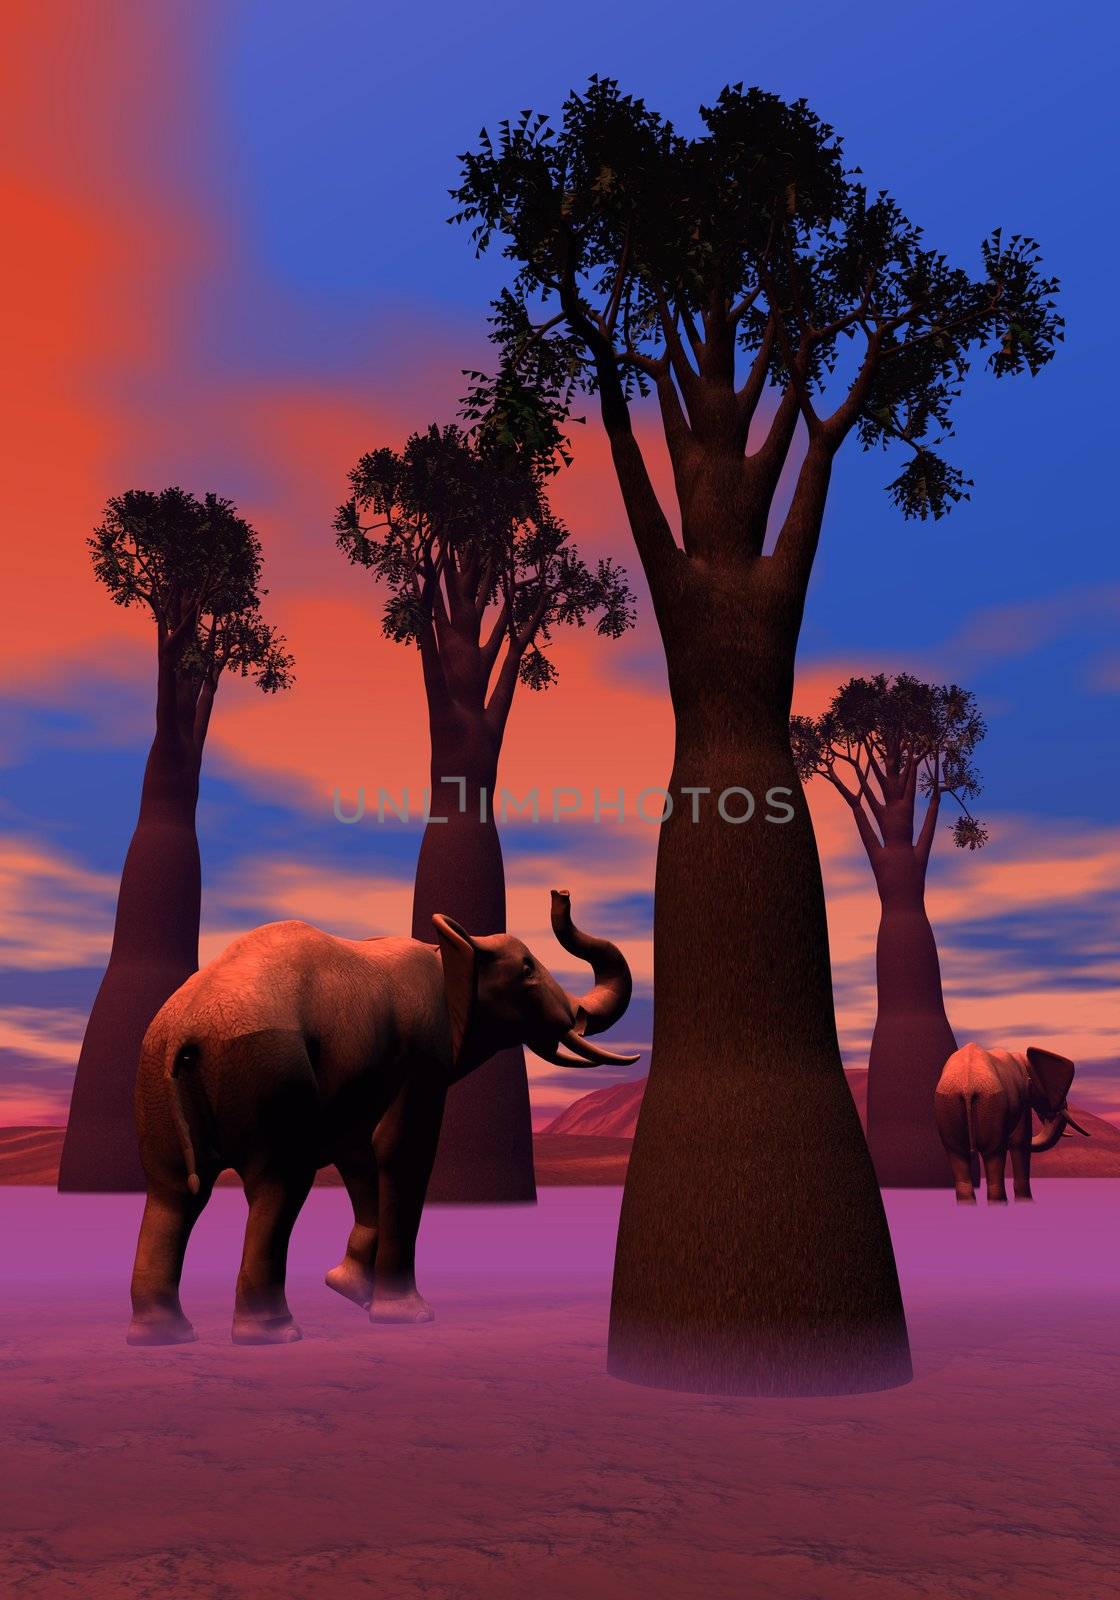 Two elephants walking between baobabs in the savannah by colorful sunset